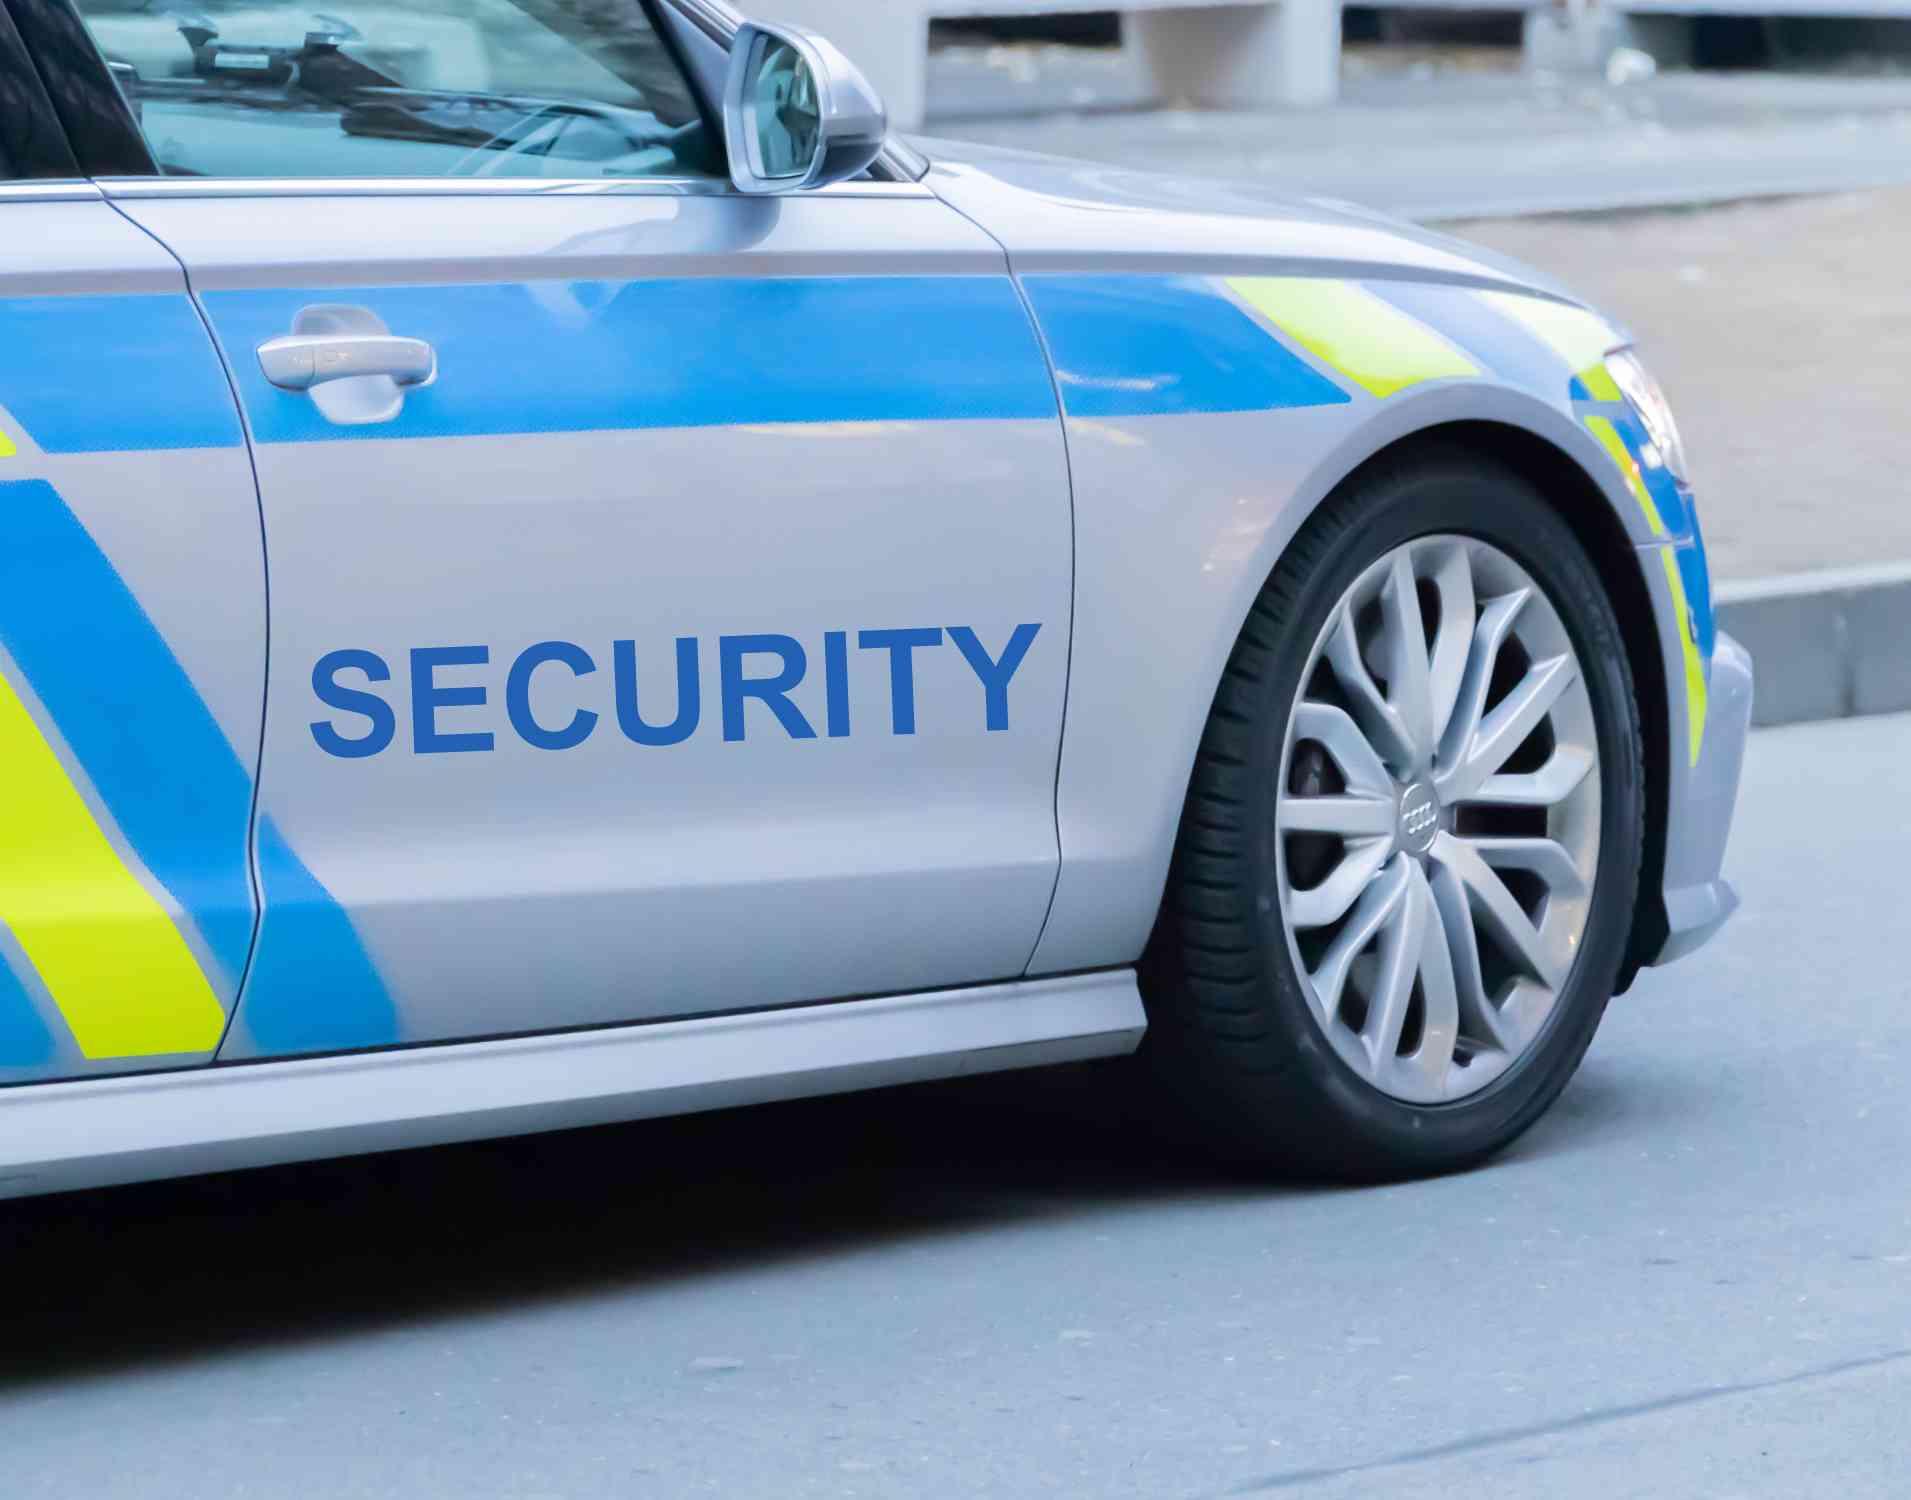 <h4>A dependable Mobile Security Patrol service may be just what you need.</h4>